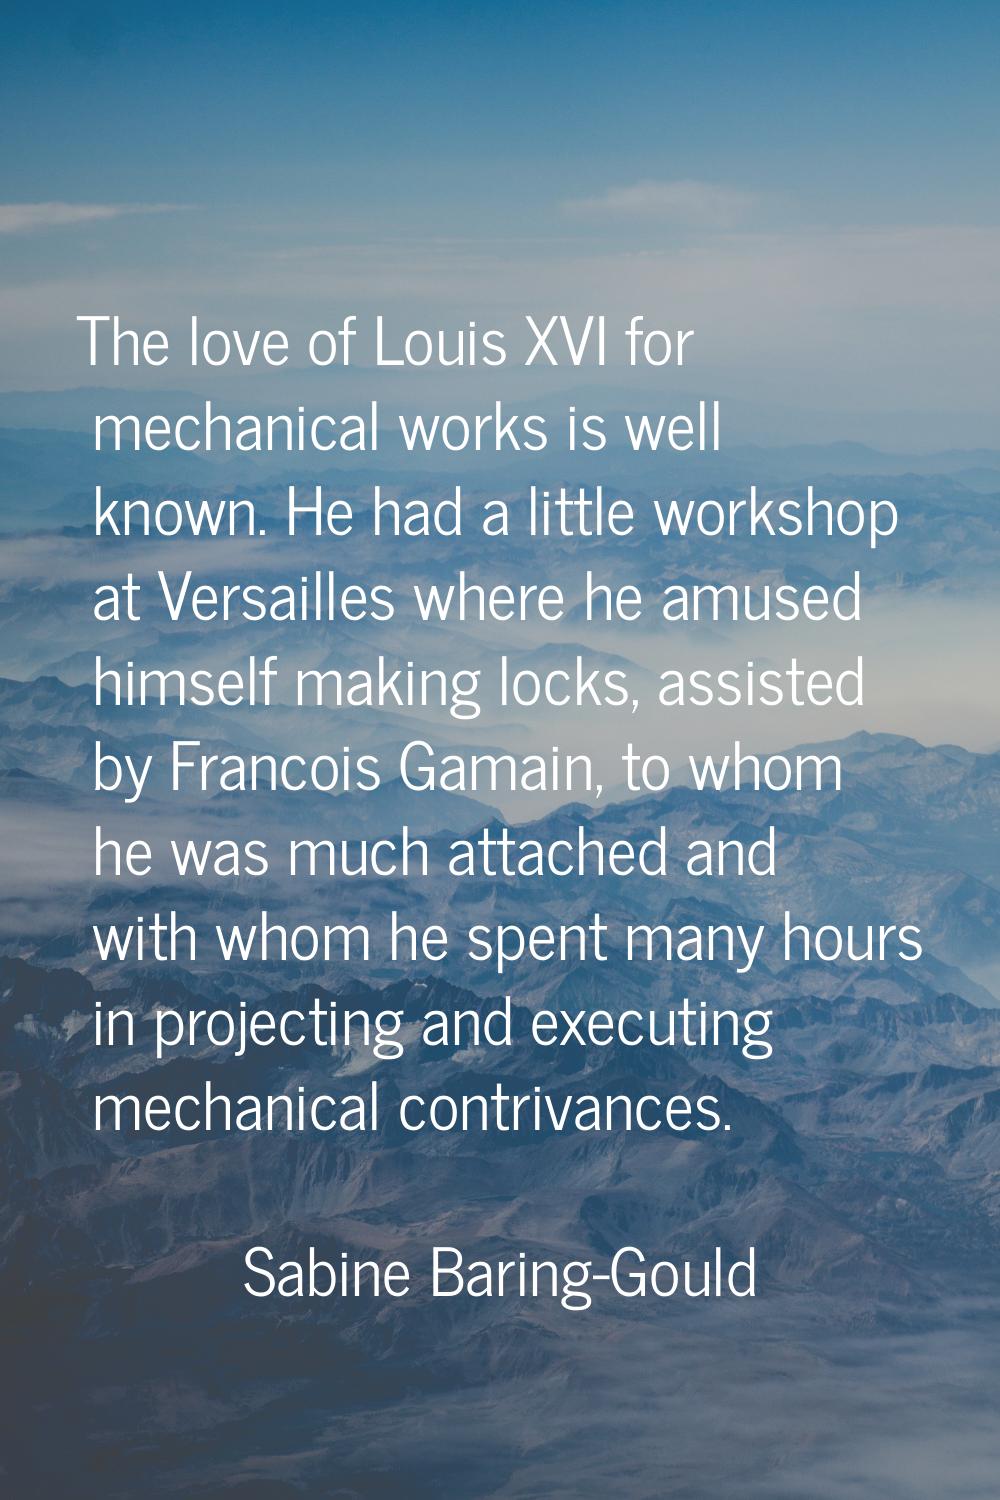 The love of Louis XVI for mechanical works is well known. He had a little workshop at Versailles wh